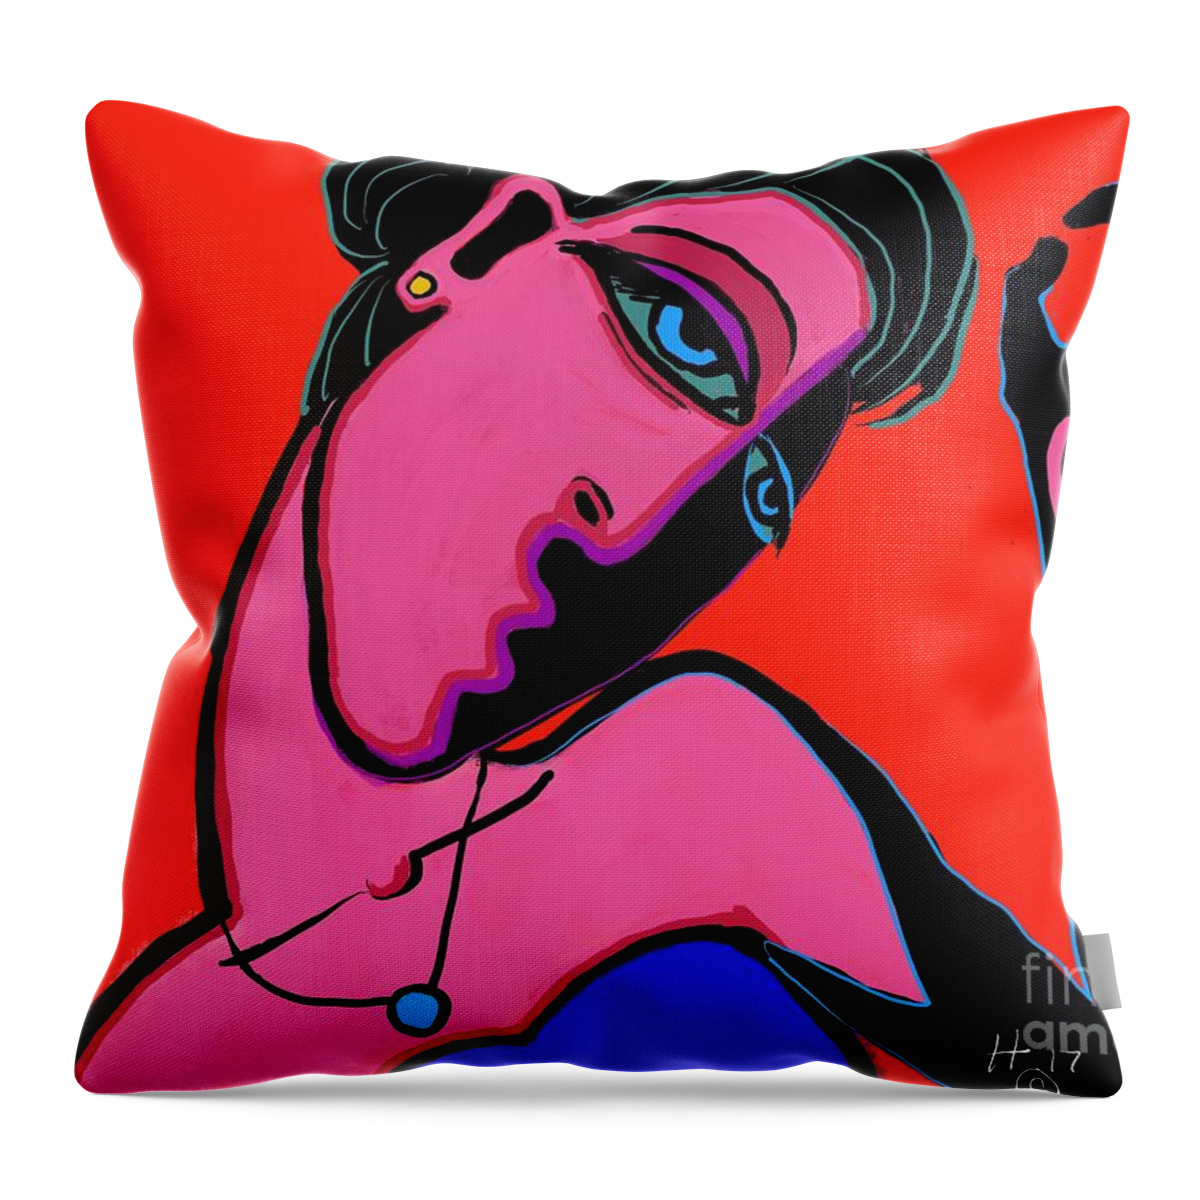  Throw Pillow featuring the digital art Too small by Hans Magden